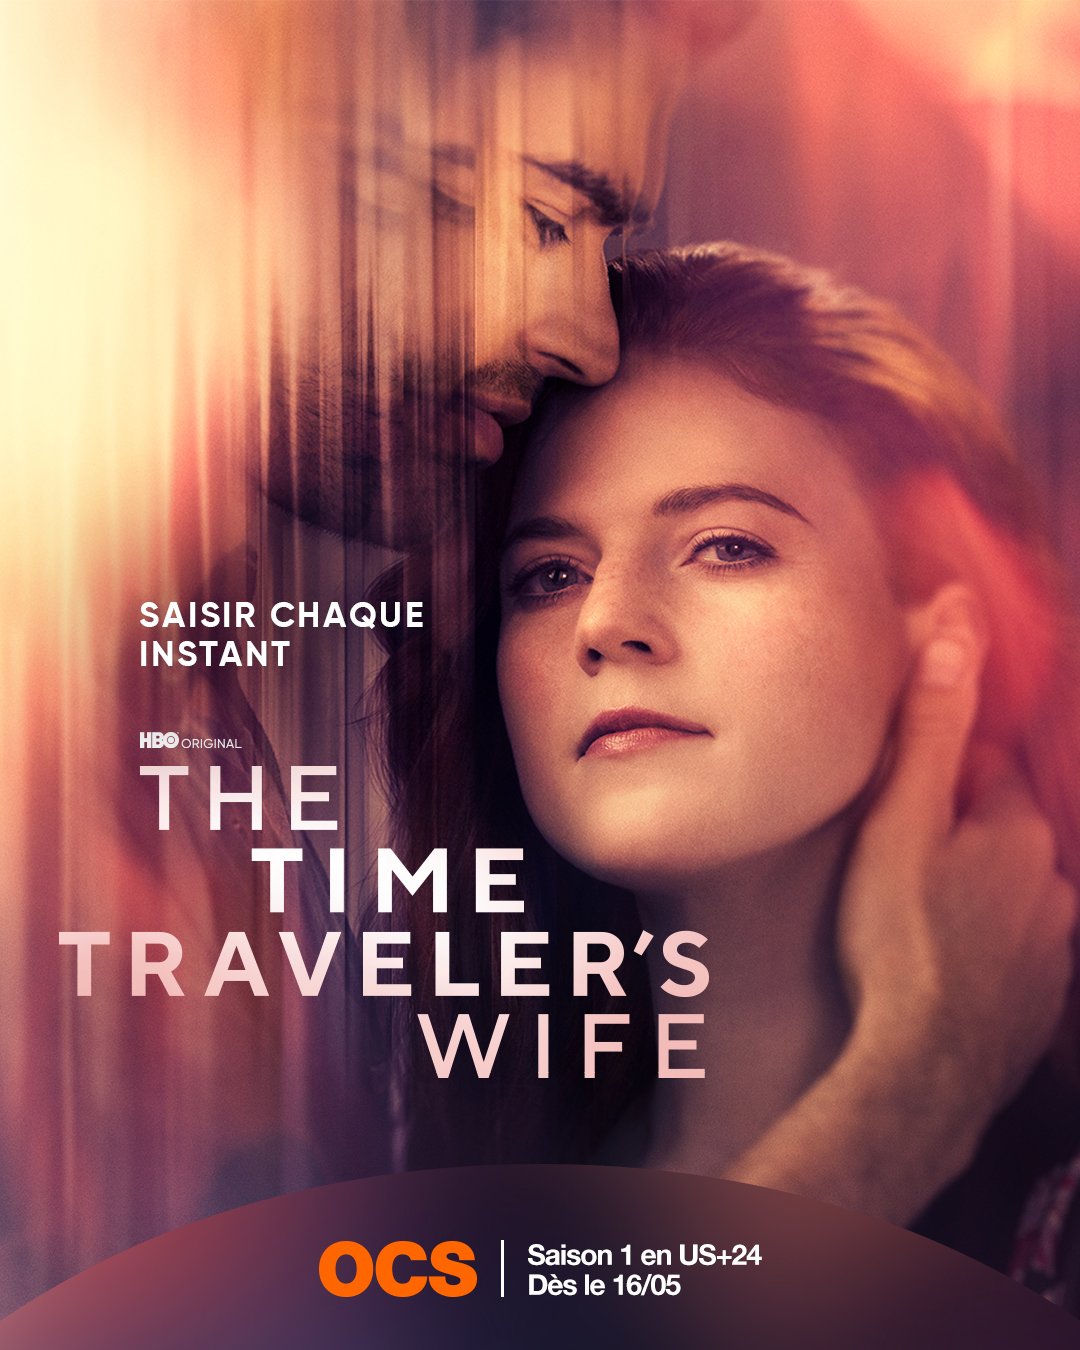 The Time Traveler's Wife - Série TV 2022 streaming VF gratuit complet